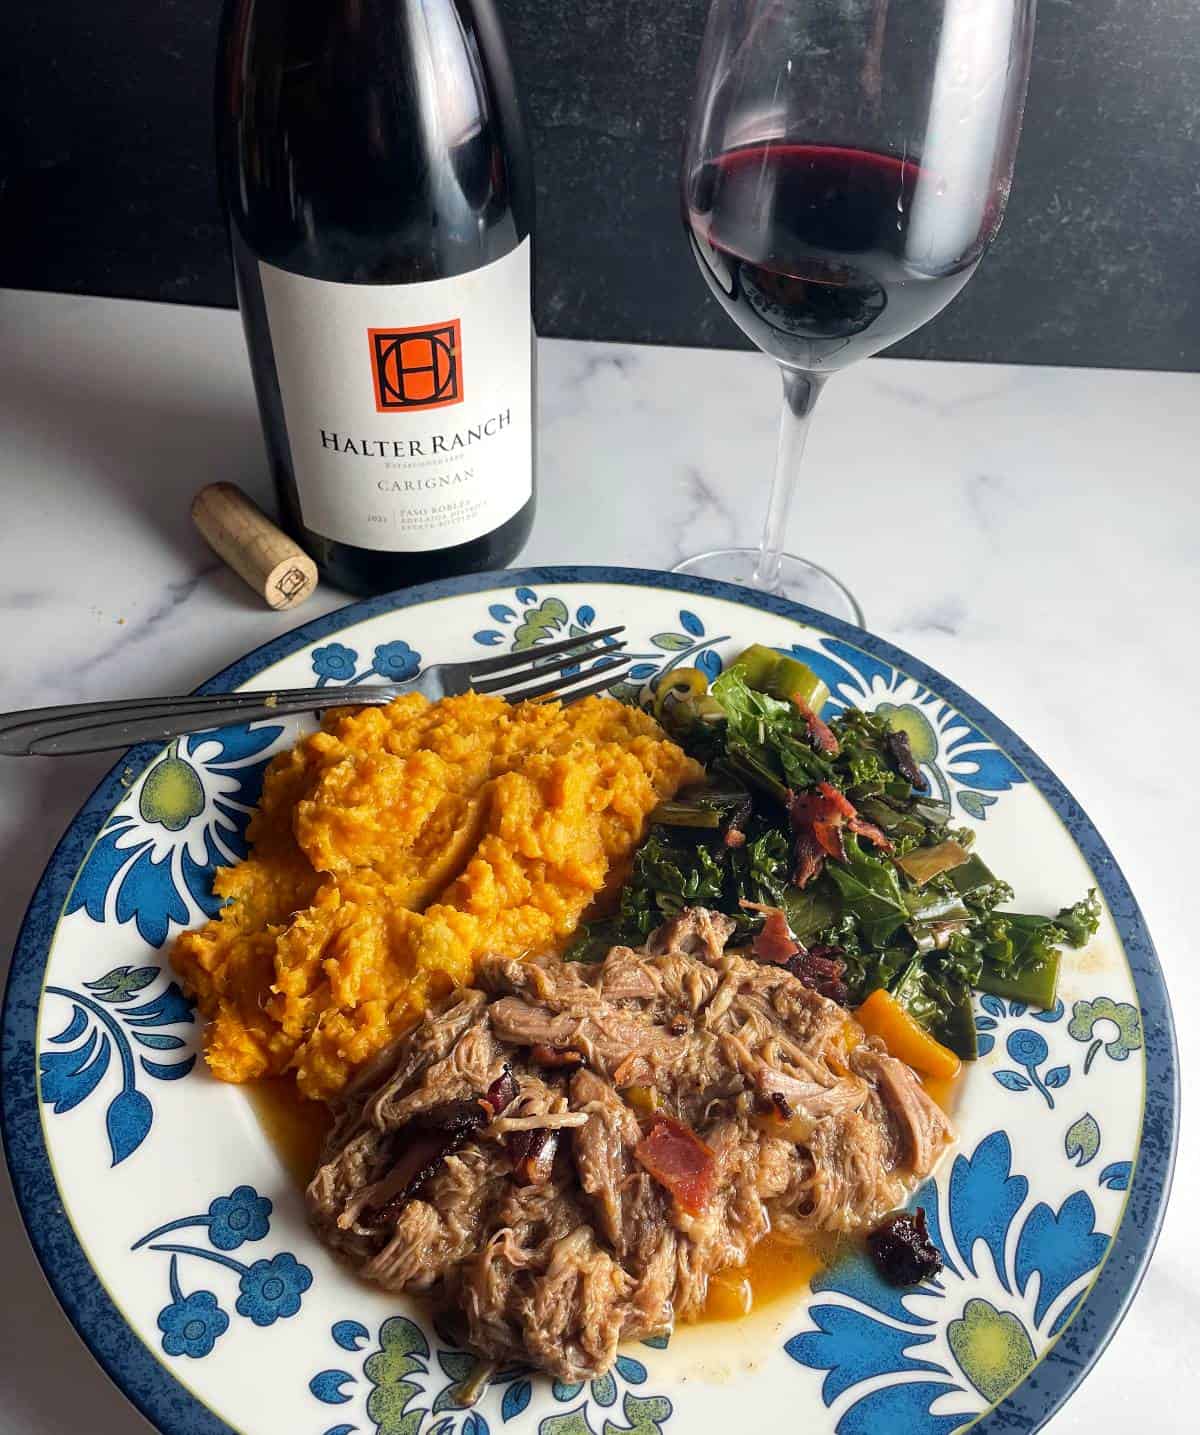 plate with flowers on the edges, with pulled pork, mashed sweet potatoes and leek greens. Bottle and glass of Carignan red wine in the background.